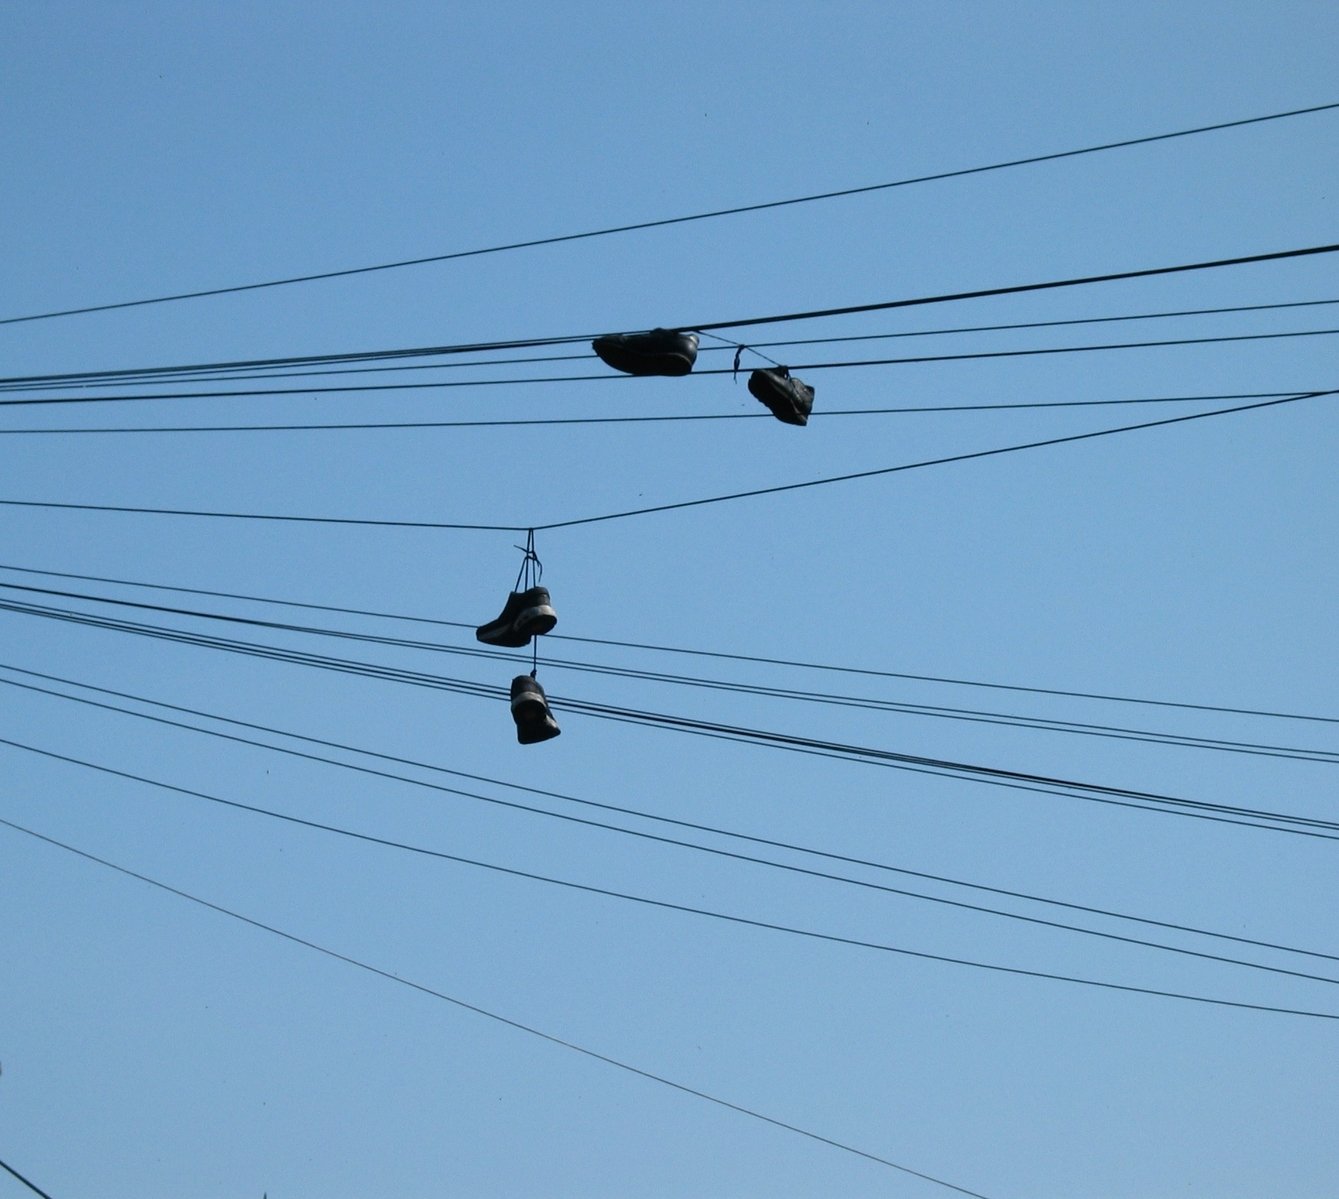 four pairs of shoes hanging on to some wires